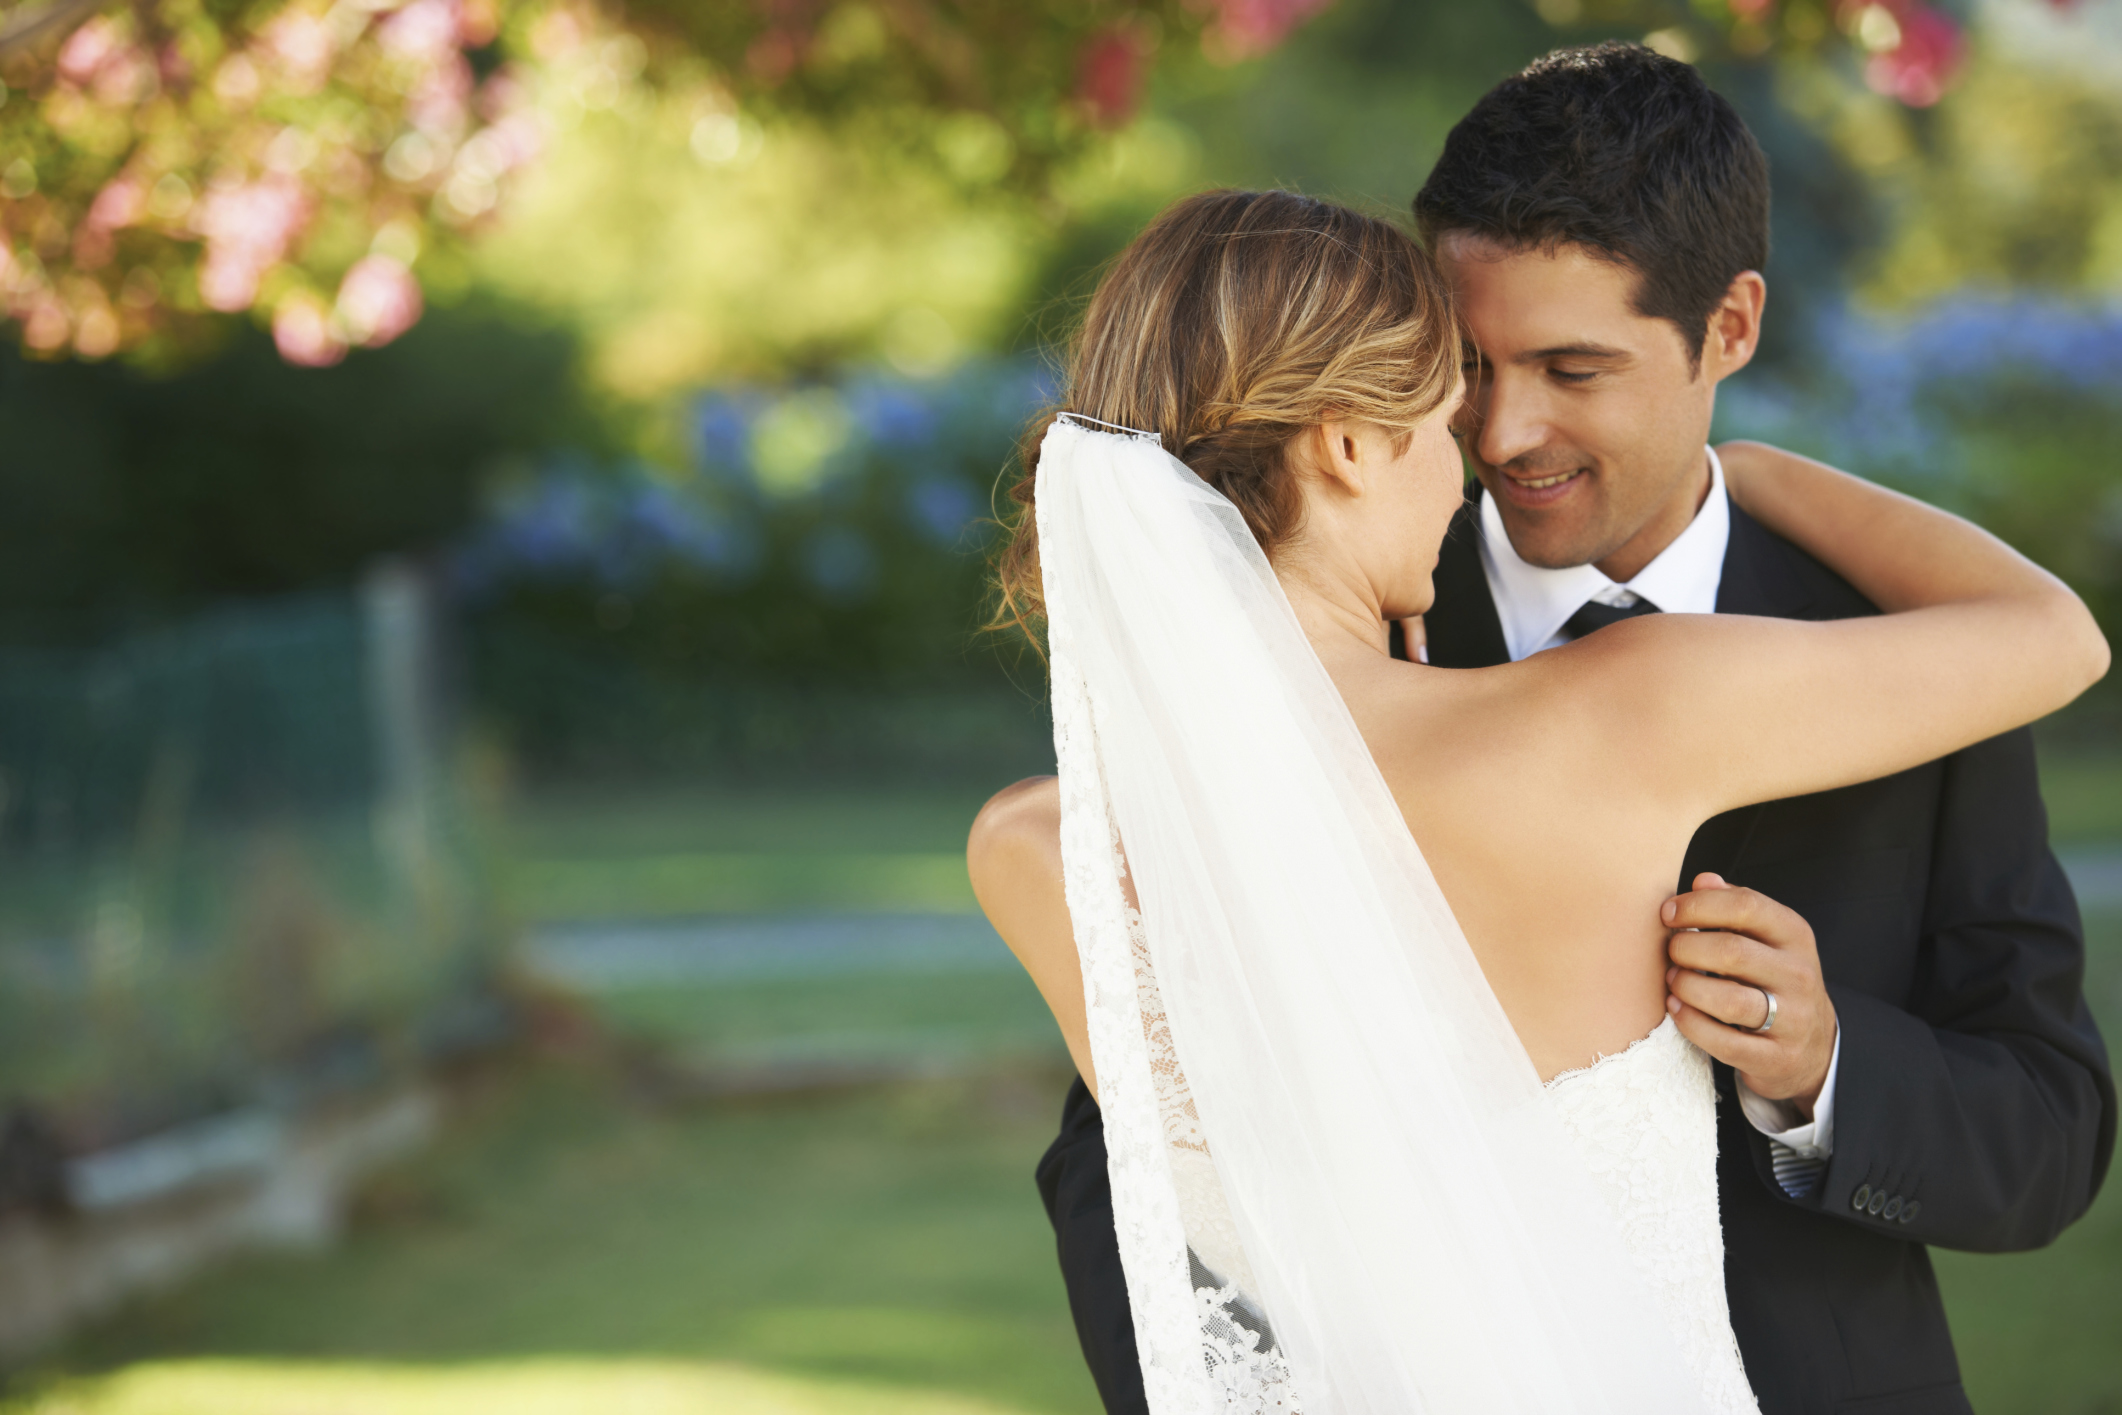 Booking a great wedding photographer pic photo